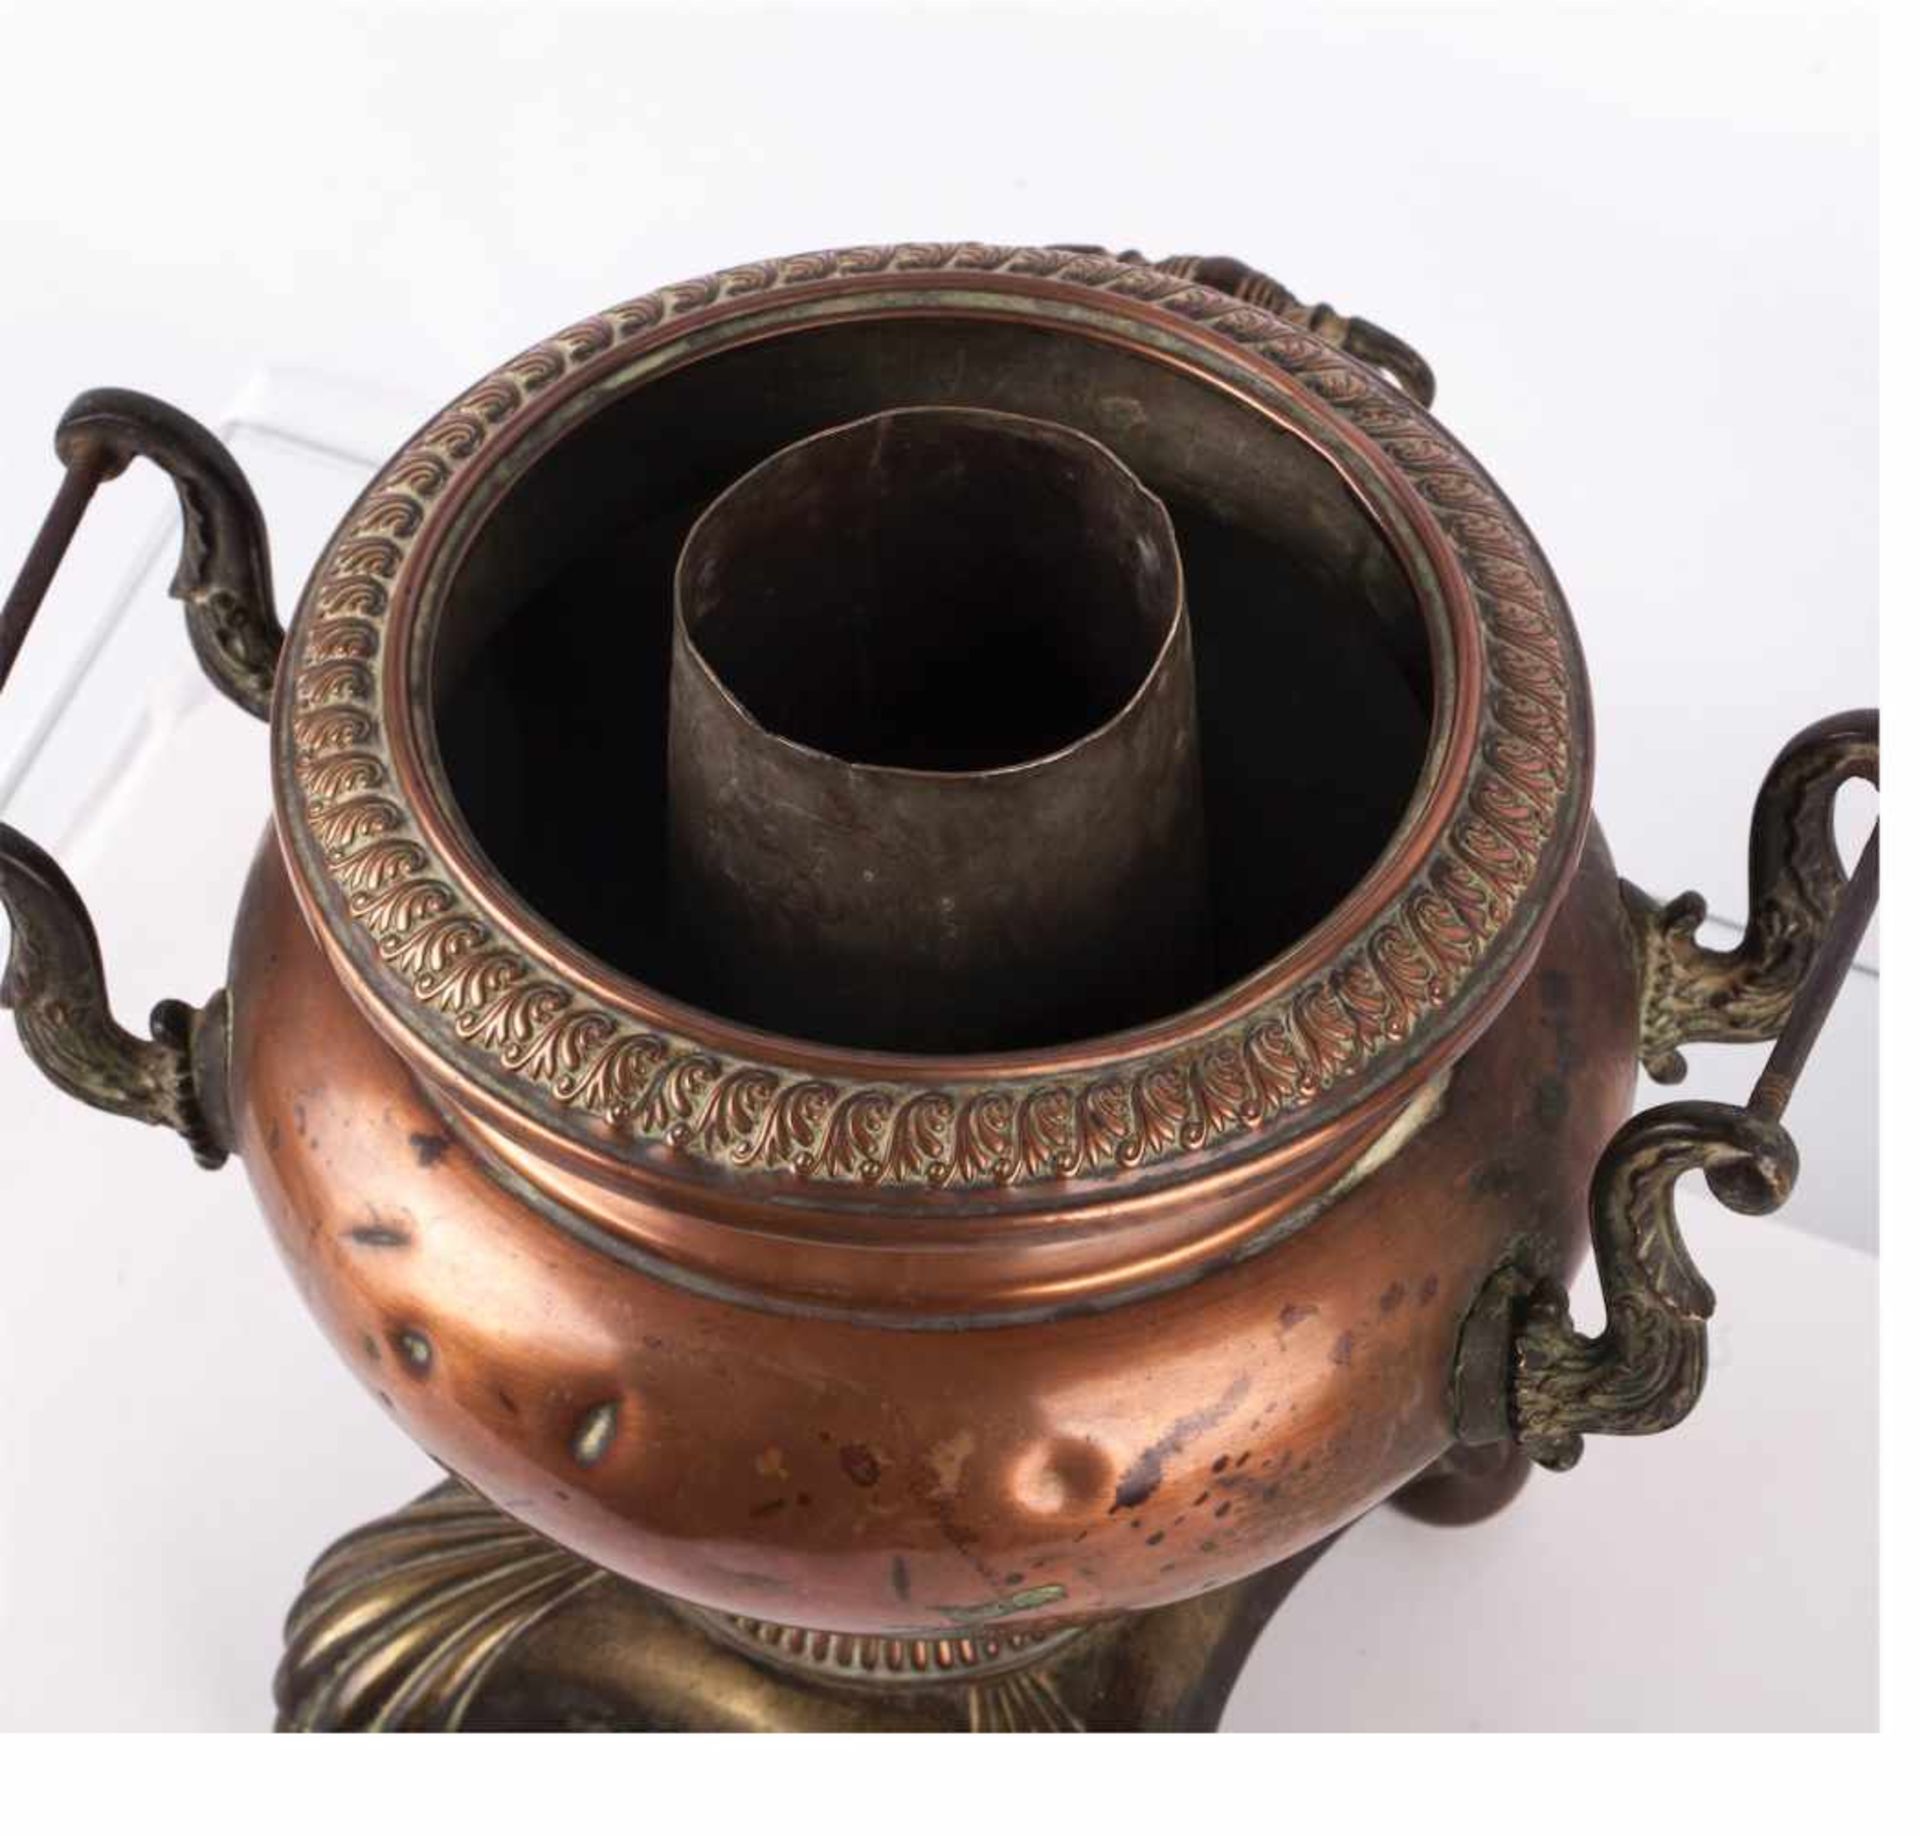 Small samovar in the shape of a vaseSmall samovar in the shape of a vase. Copper, cast, chasing, - Image 4 of 6